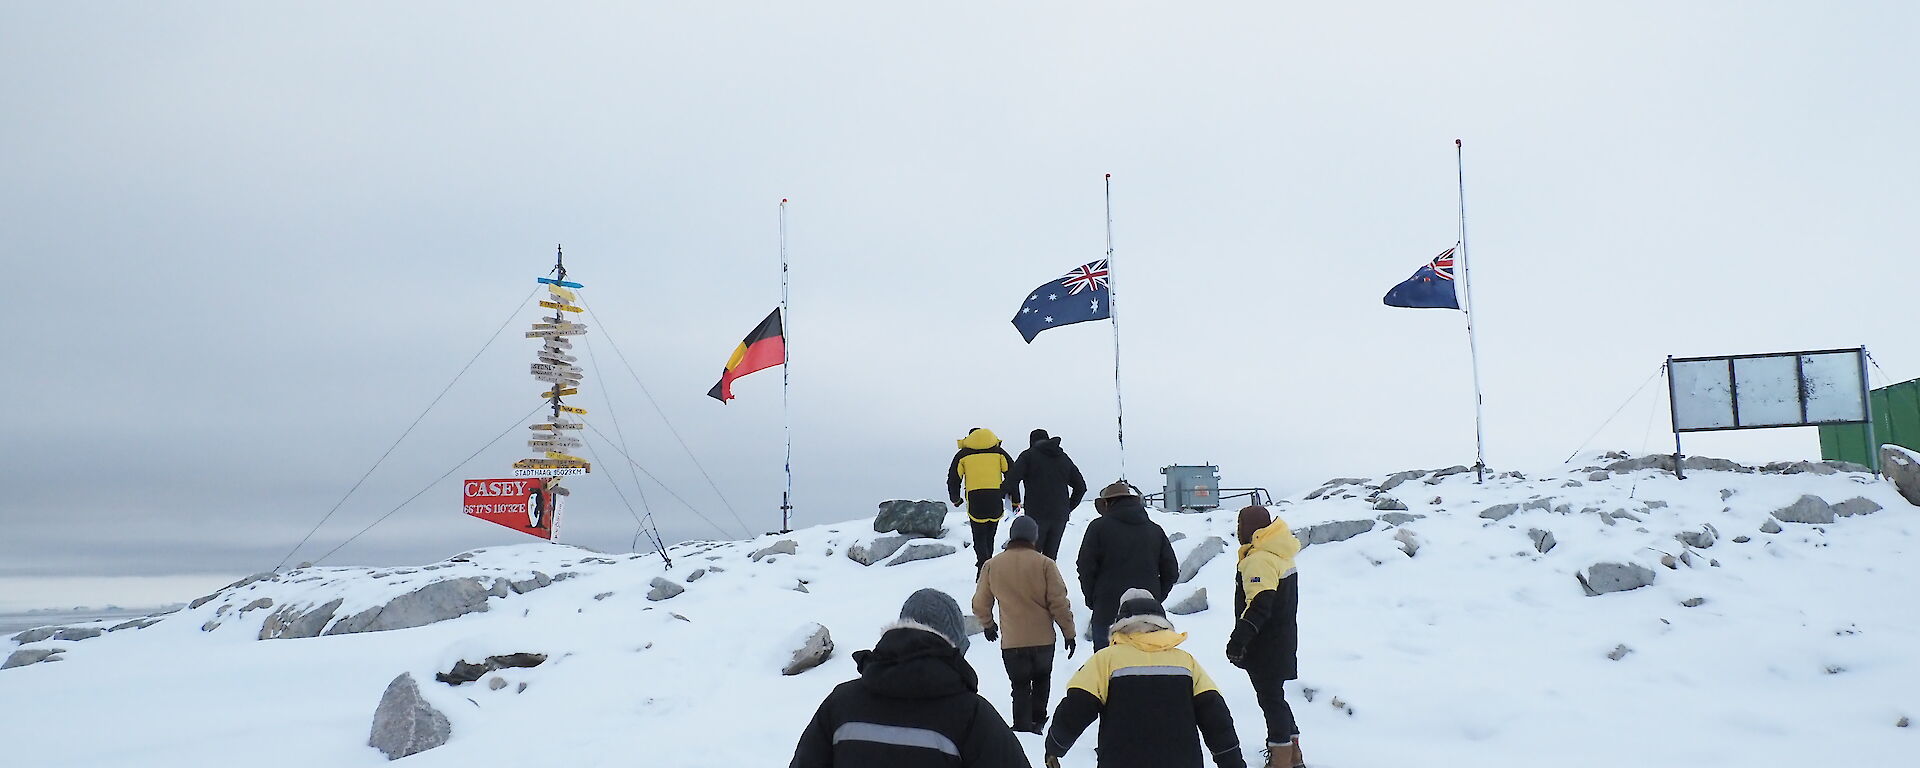 A group of expeditioners walk up a snowy slope towards 3 flag poles flying the Australian, New Zealand and Aboriginal flags at half mast